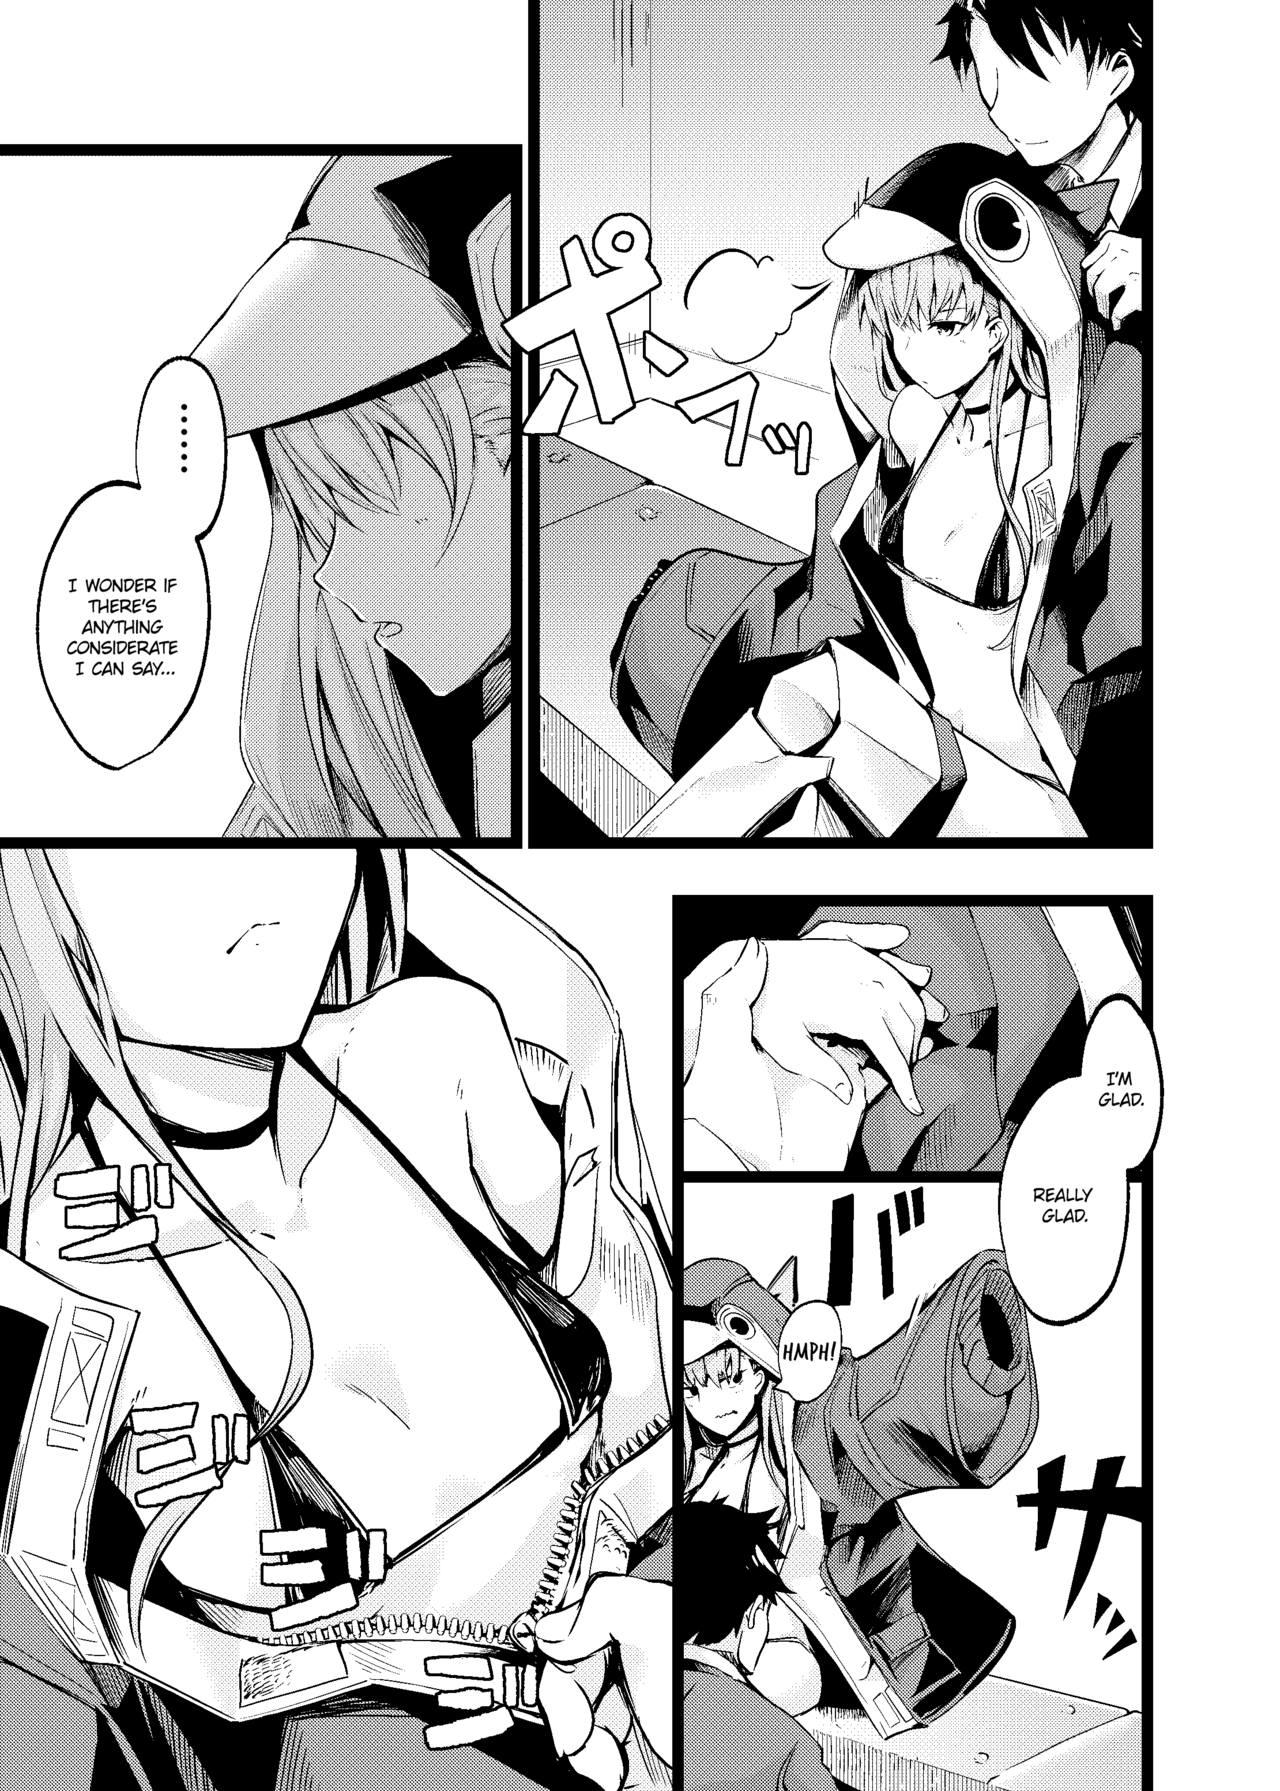 Perfect Doing it with Meltryllis in her Swimsuit - Fate grand order Olderwoman - Page 4